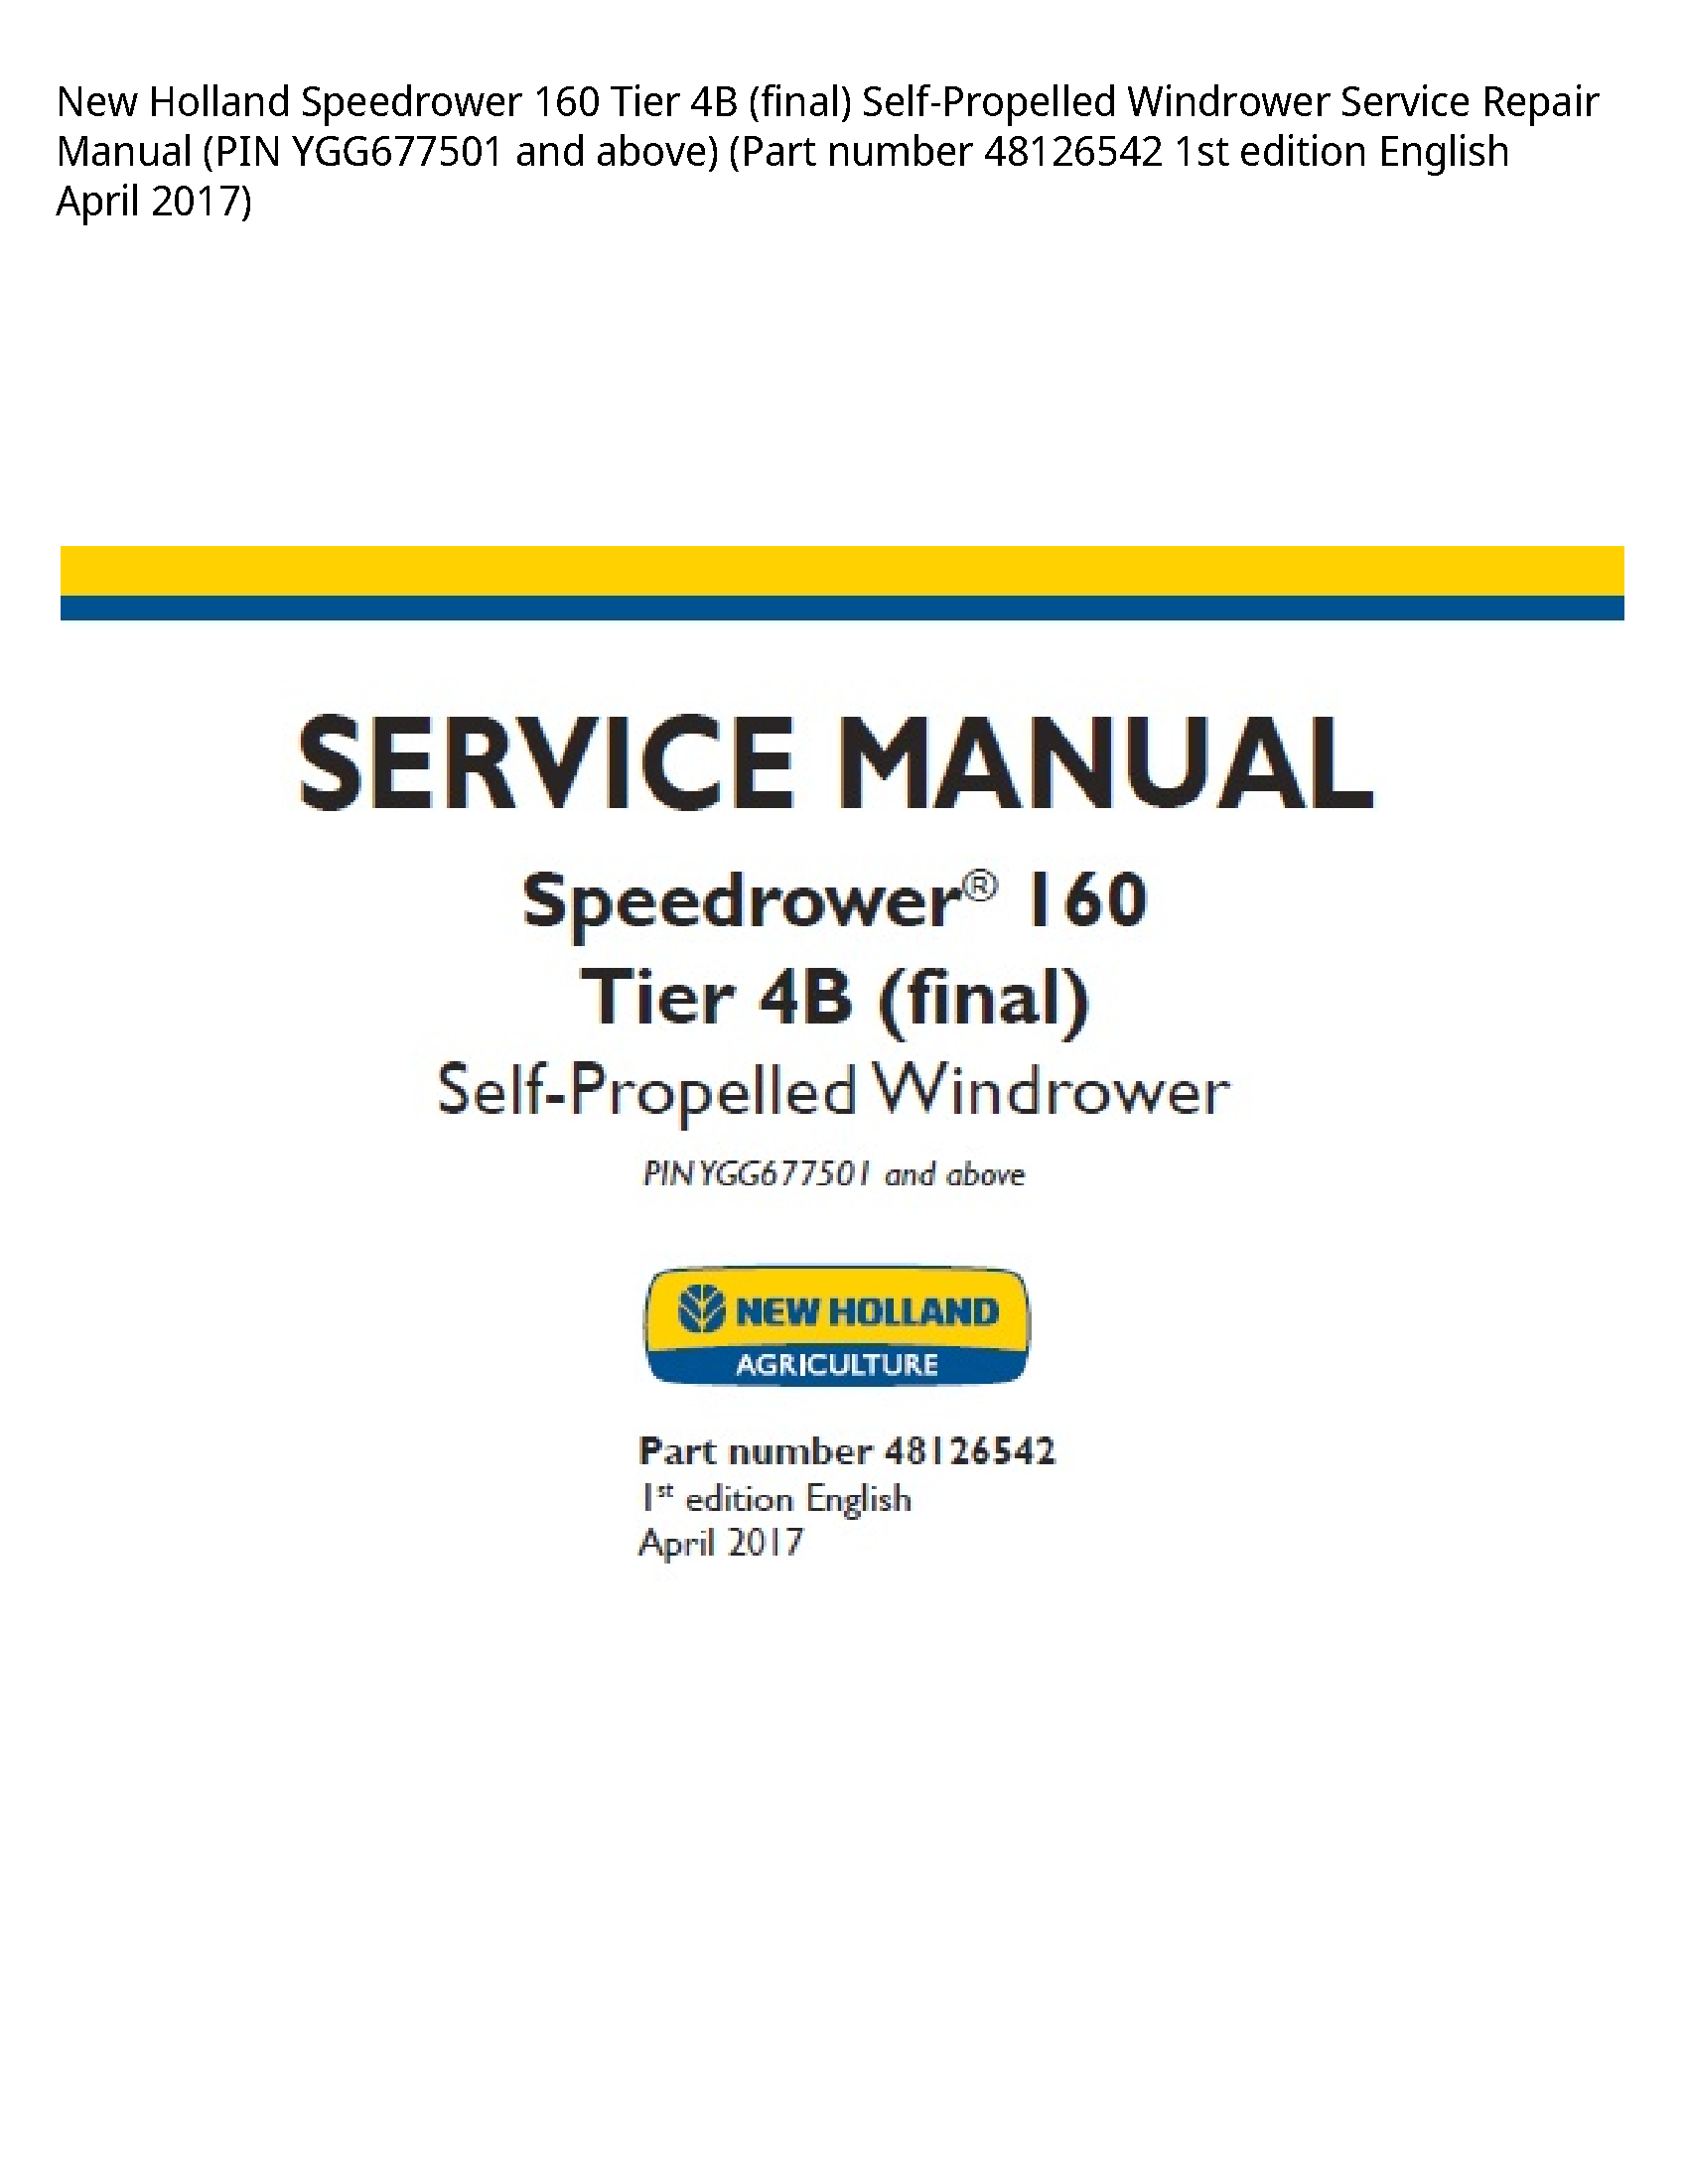 New Holland 160 Speedrower Tier (final) Self-Propelled Windrower manual